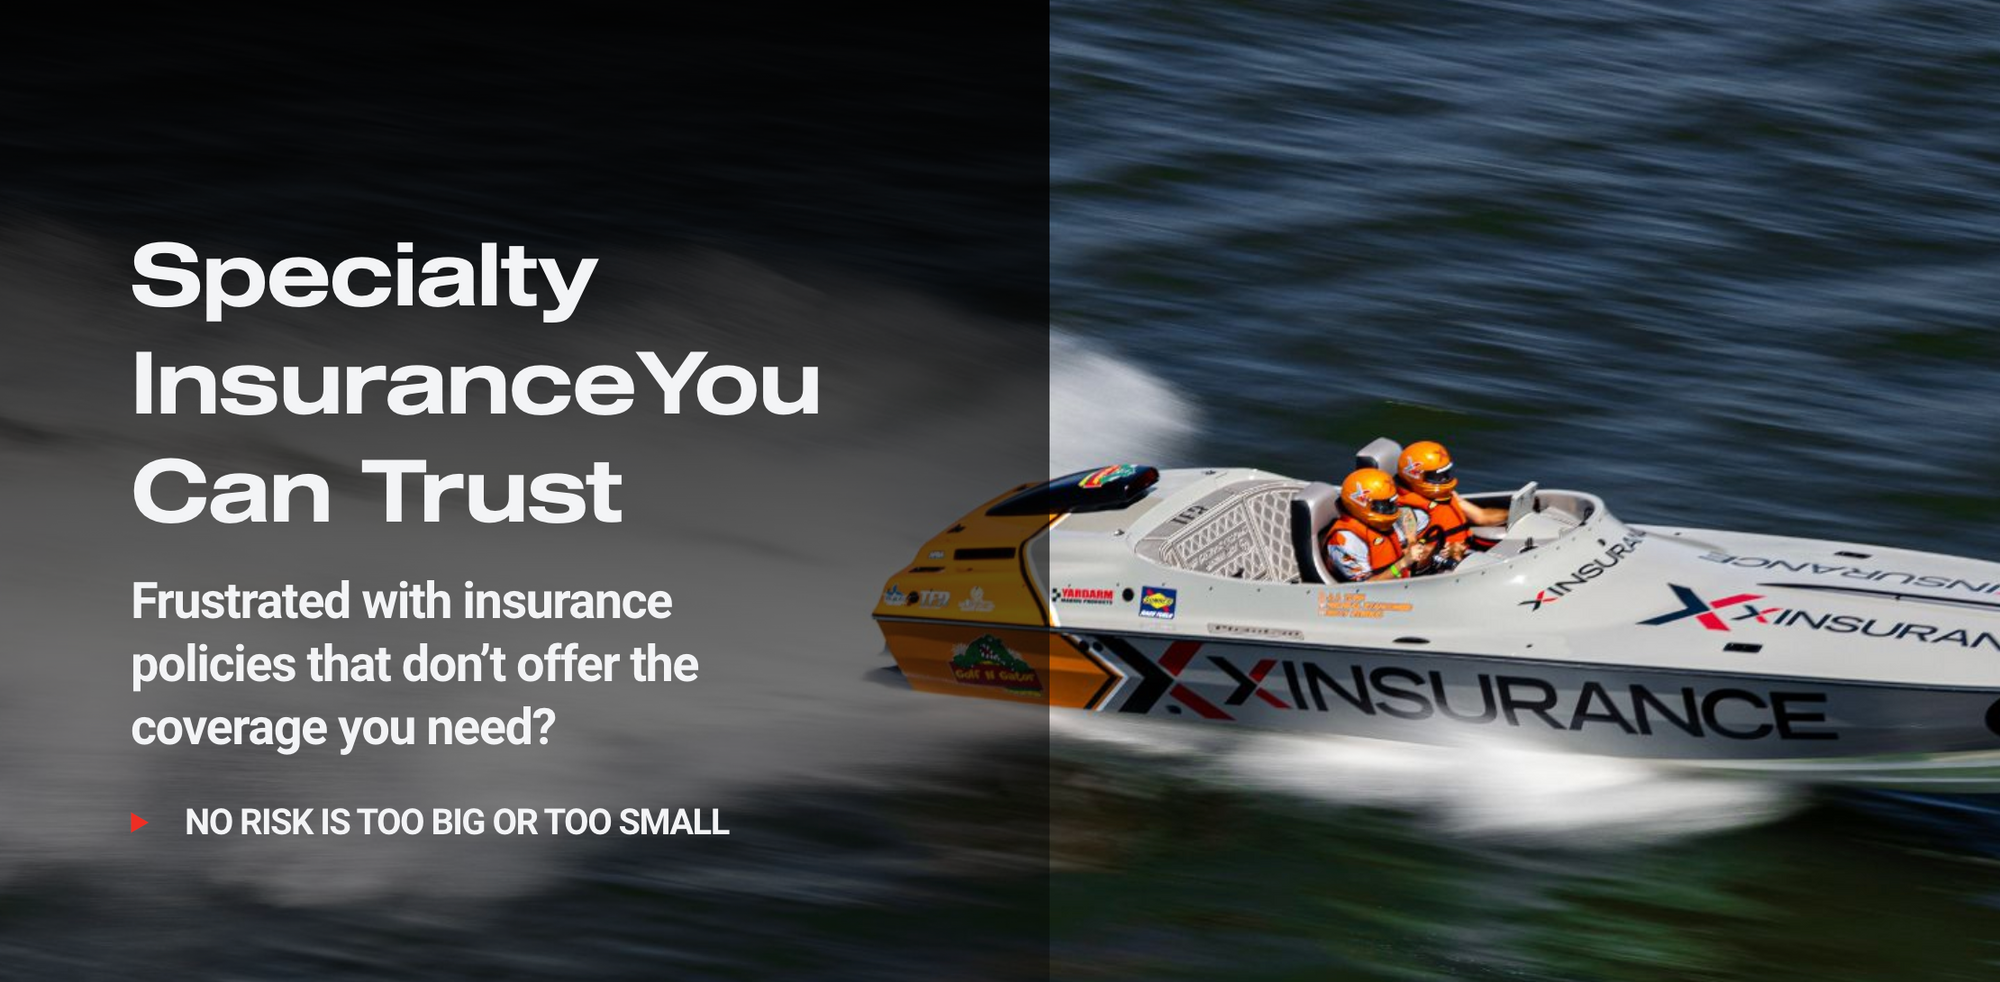 225 - XINSURANCE Owner Rick Lindsey on Sponsoring the Powerboat Races